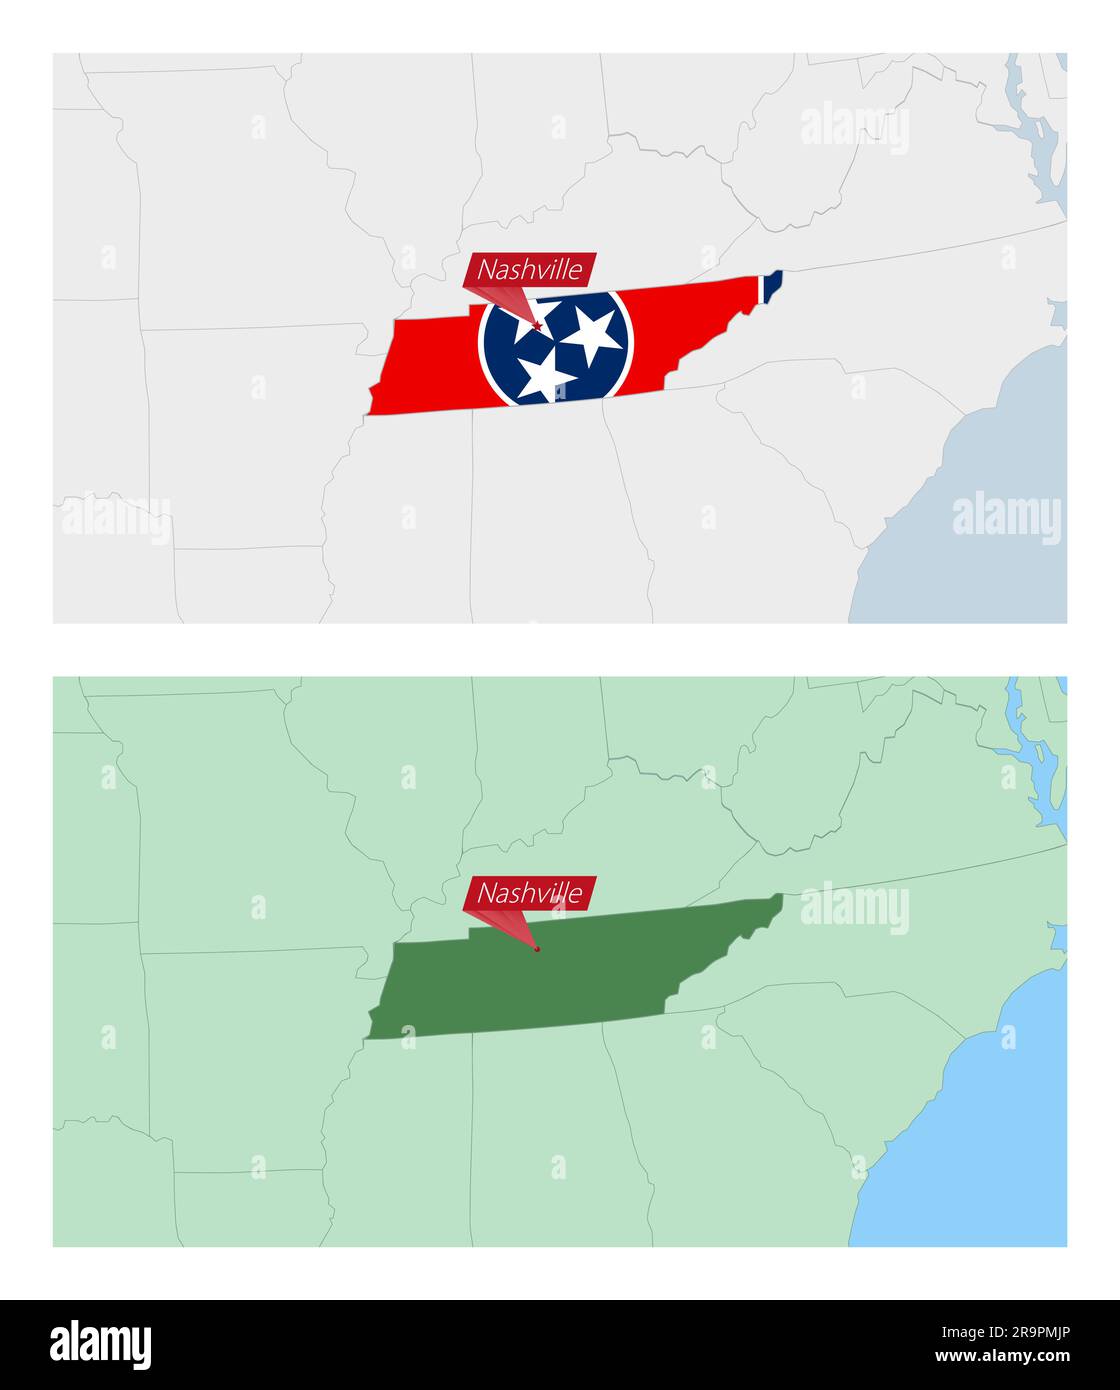 Premium Vector  Us state tennessee map highlighted in tennessee flag colors  and pin of country capital nashville